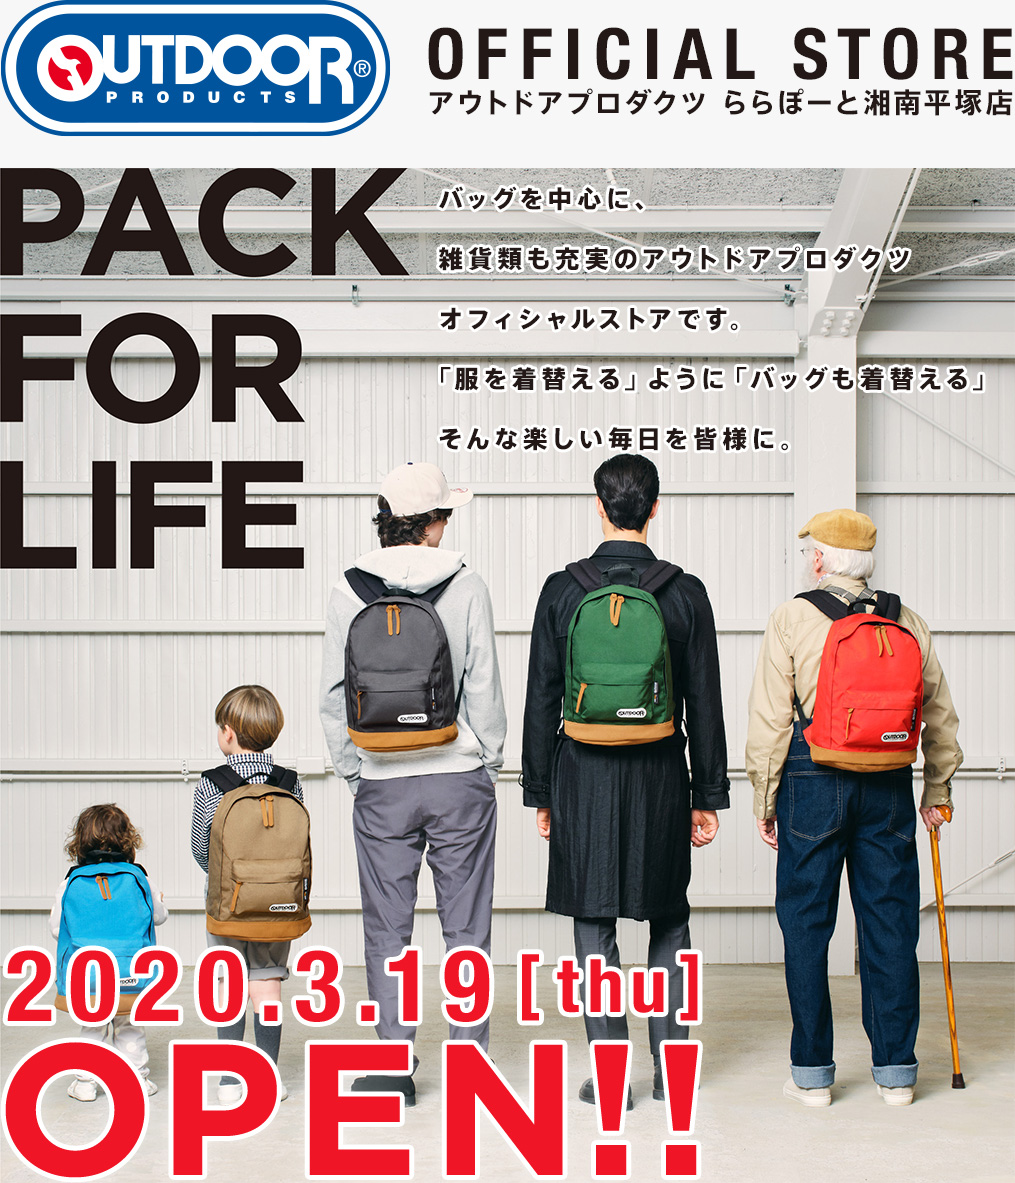 OUTDOOR PRODUCTS ららぽーと湘南平塚店 3月19日(木) NEW OPEN！